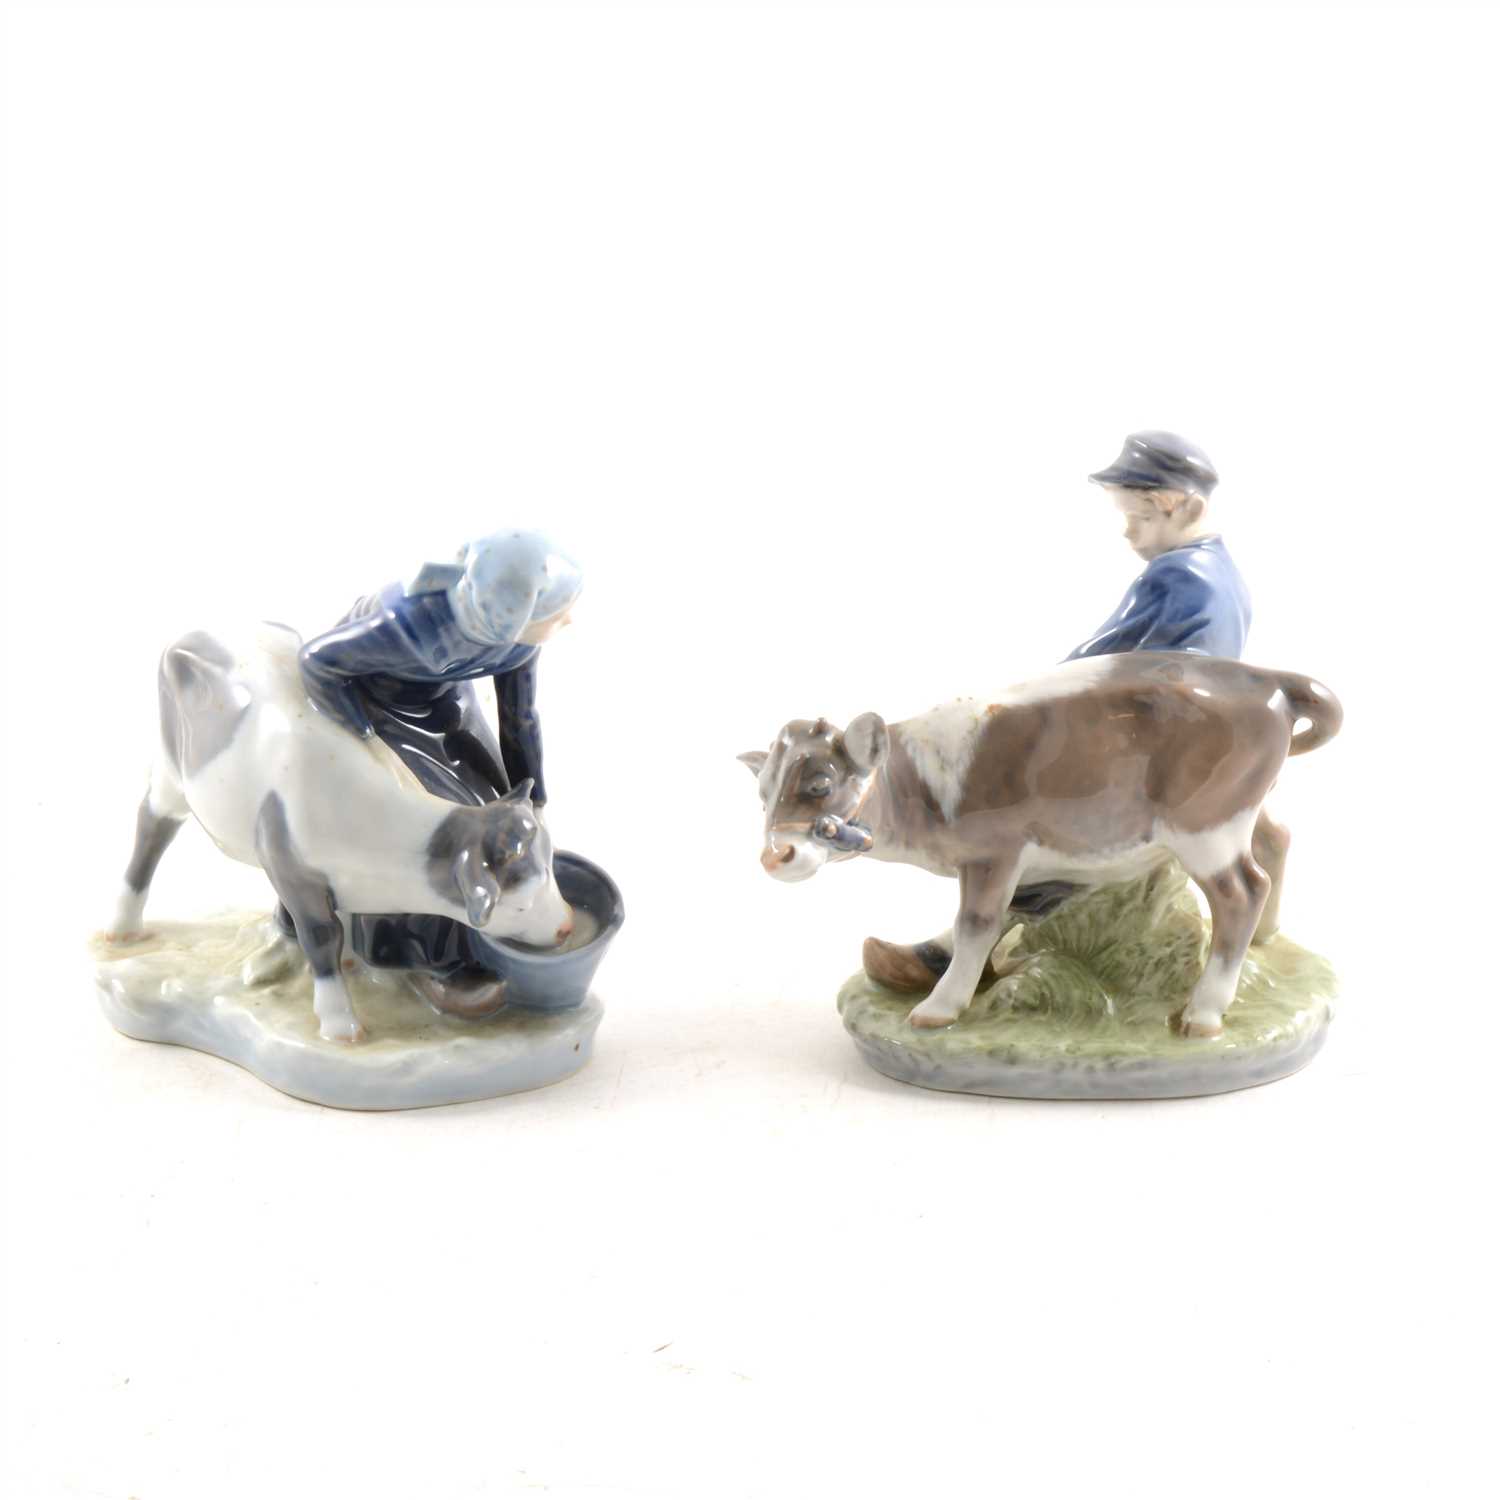 Lot 40 - Pair of Royal Copenhagen porcelain models, Boy with Calf, and Girl with Calf